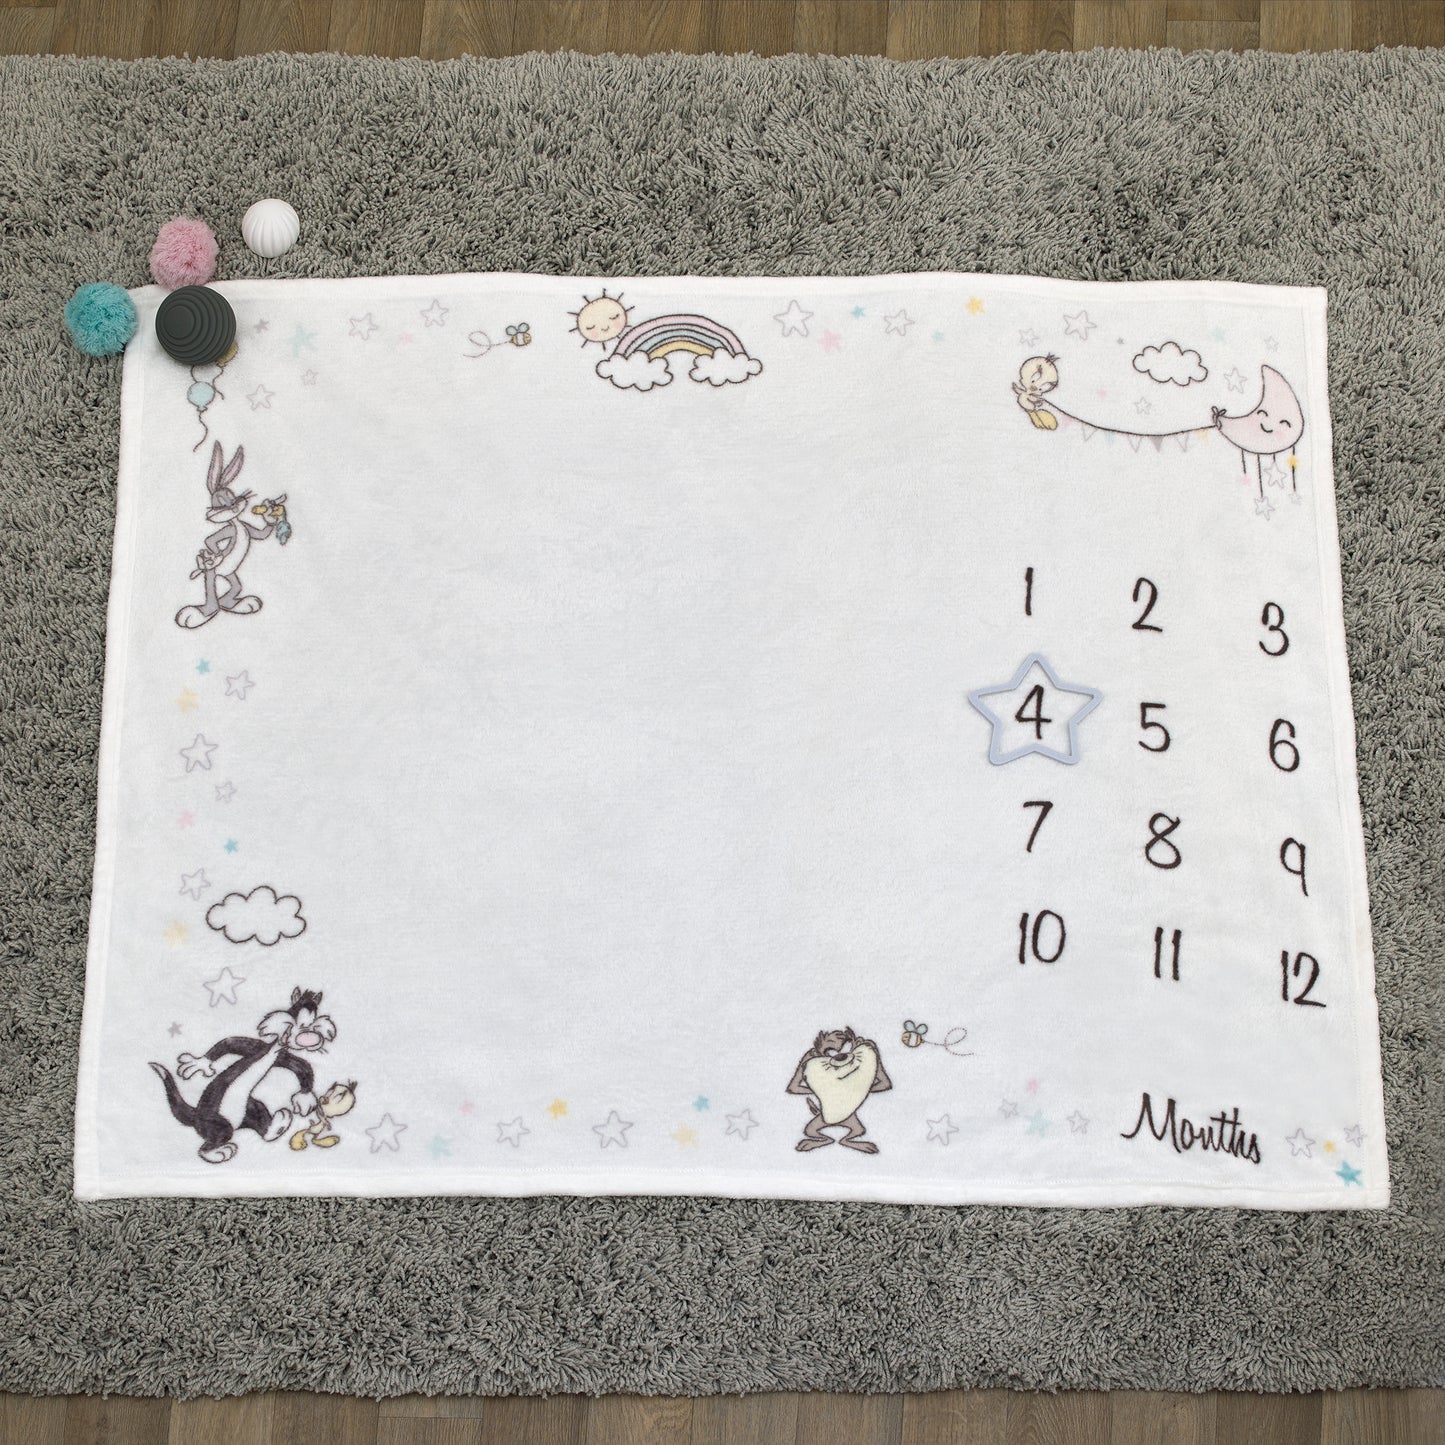 Warner Brothers Looney Tunes Best Buds White with Pastel Blue, Pink, and Yellow Bugs Bunny, Tweety, Tasmanian Devil, and Sylvester the Cat Milestone Blanket